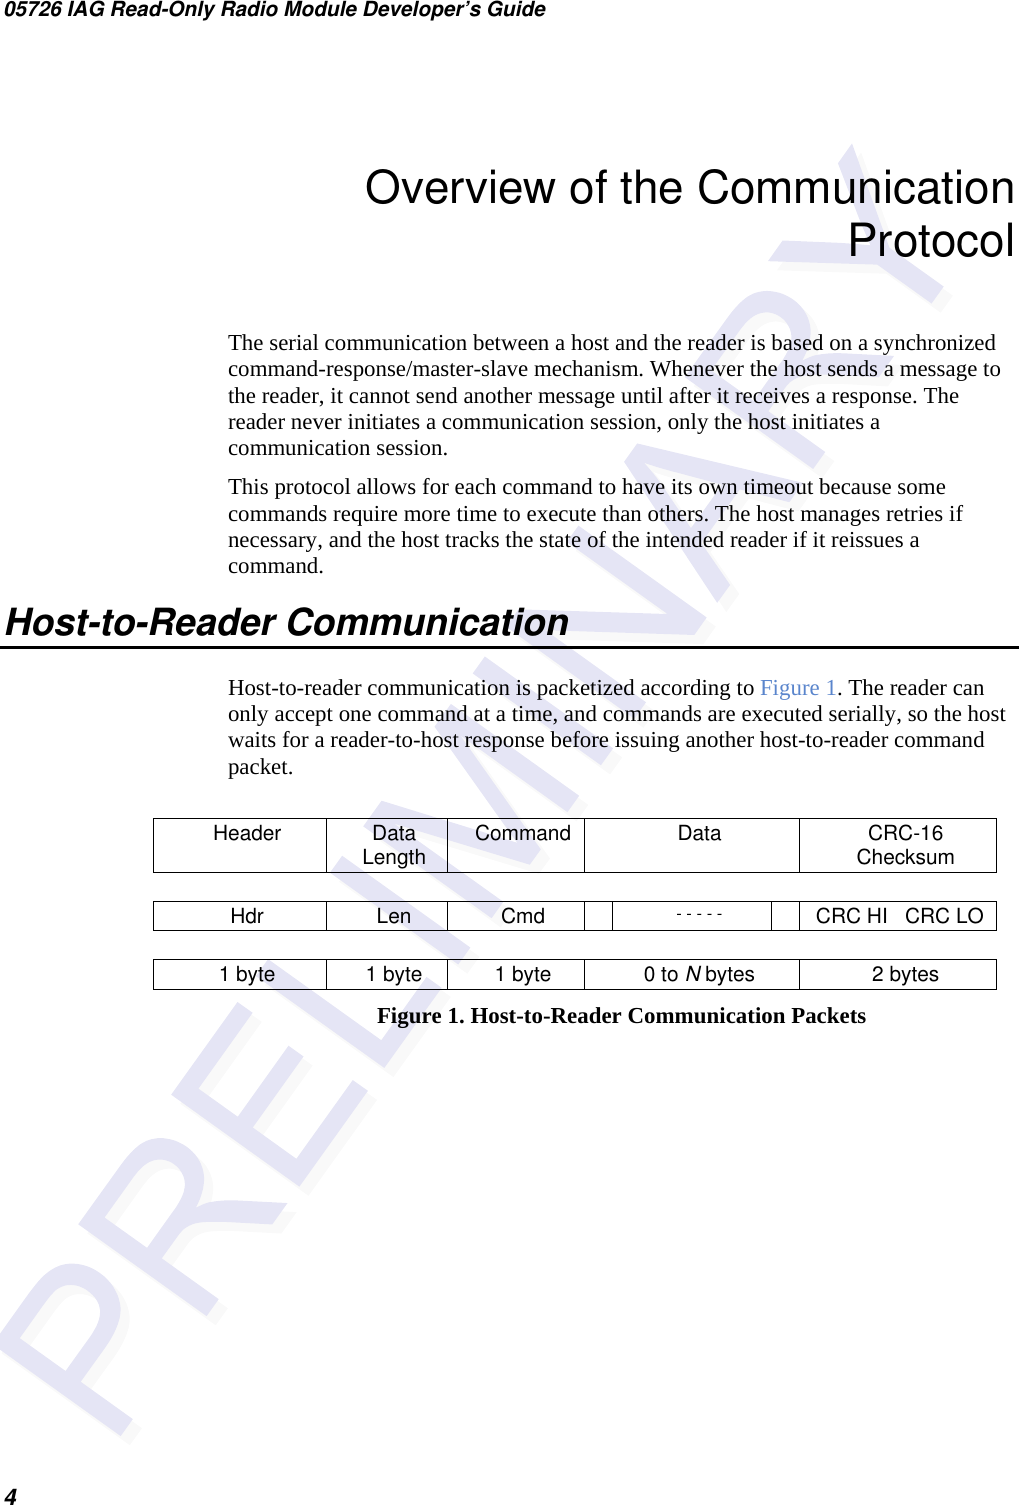 05726 IAG Read-Only Radio Module Developer’s Guide Overview of the Communication Protocol The serial communication between a host and the reader is based on a synchronized command-response/master-slave mechanism. Whenever the host sends a message to the reader, it cannot send another message until after it receives a response. The reader never initiates a communication session, only the host initiates a communication session. This protocol allows for each command to have its own timeout because some commands require more time to execute than others. The host manages retries if necessary, and the host tracks the state of the intended reader if it reissues a command. Host-to-Reader Communication Host-to-reader communication is packetized according to Figure 1. The reader can only accept one command at a time, and commands are executed serially, so the host waits for a reader-to-host response before issuing another host-to-reader command packet.  Header Data Length  Command Data  CRC-16 Checksum  Hdr Len Cmd  - - - - -    CRC HI   CRC LO  1 byte  1 byte  1 byte  0 to N bytes  2 bytes Figure 1. Host-to-Reader Communication Packets   4 